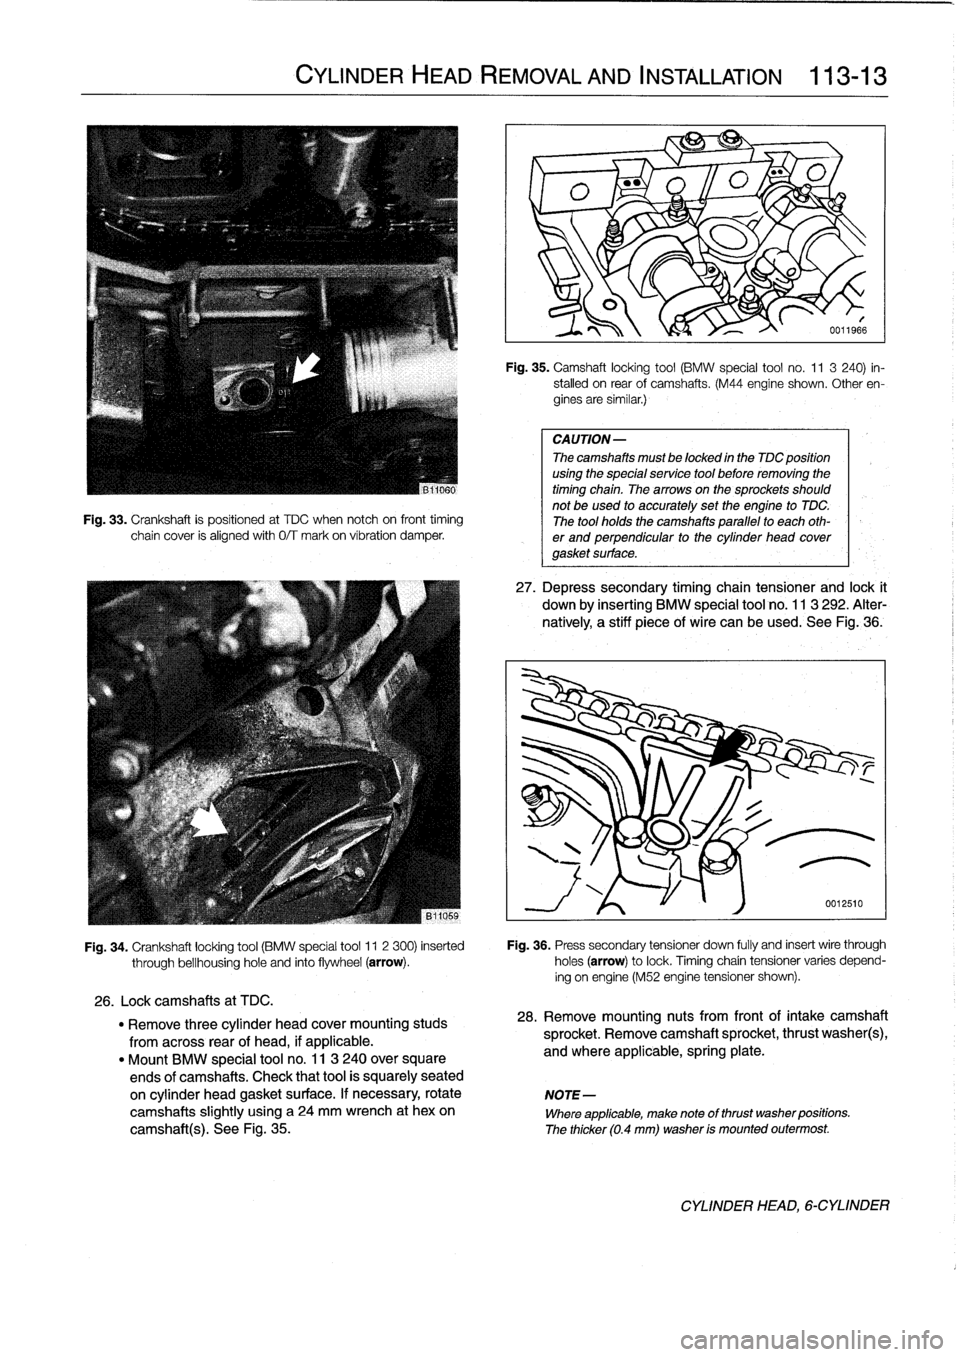 BMW 323i 1993 E36 Owners Manual 
Fig
.
33
.
Crankshaft
is
positioned
at
TDC
when
notch
oh
front
timing
chain
cover
is
alignedwith
0/T
mark
on
víbration
damper
.

CYLINDER
HEAD
REMOVAL
AND
INSTALLATION

	

113-
1
3

Fig
.
35
.
Camsh